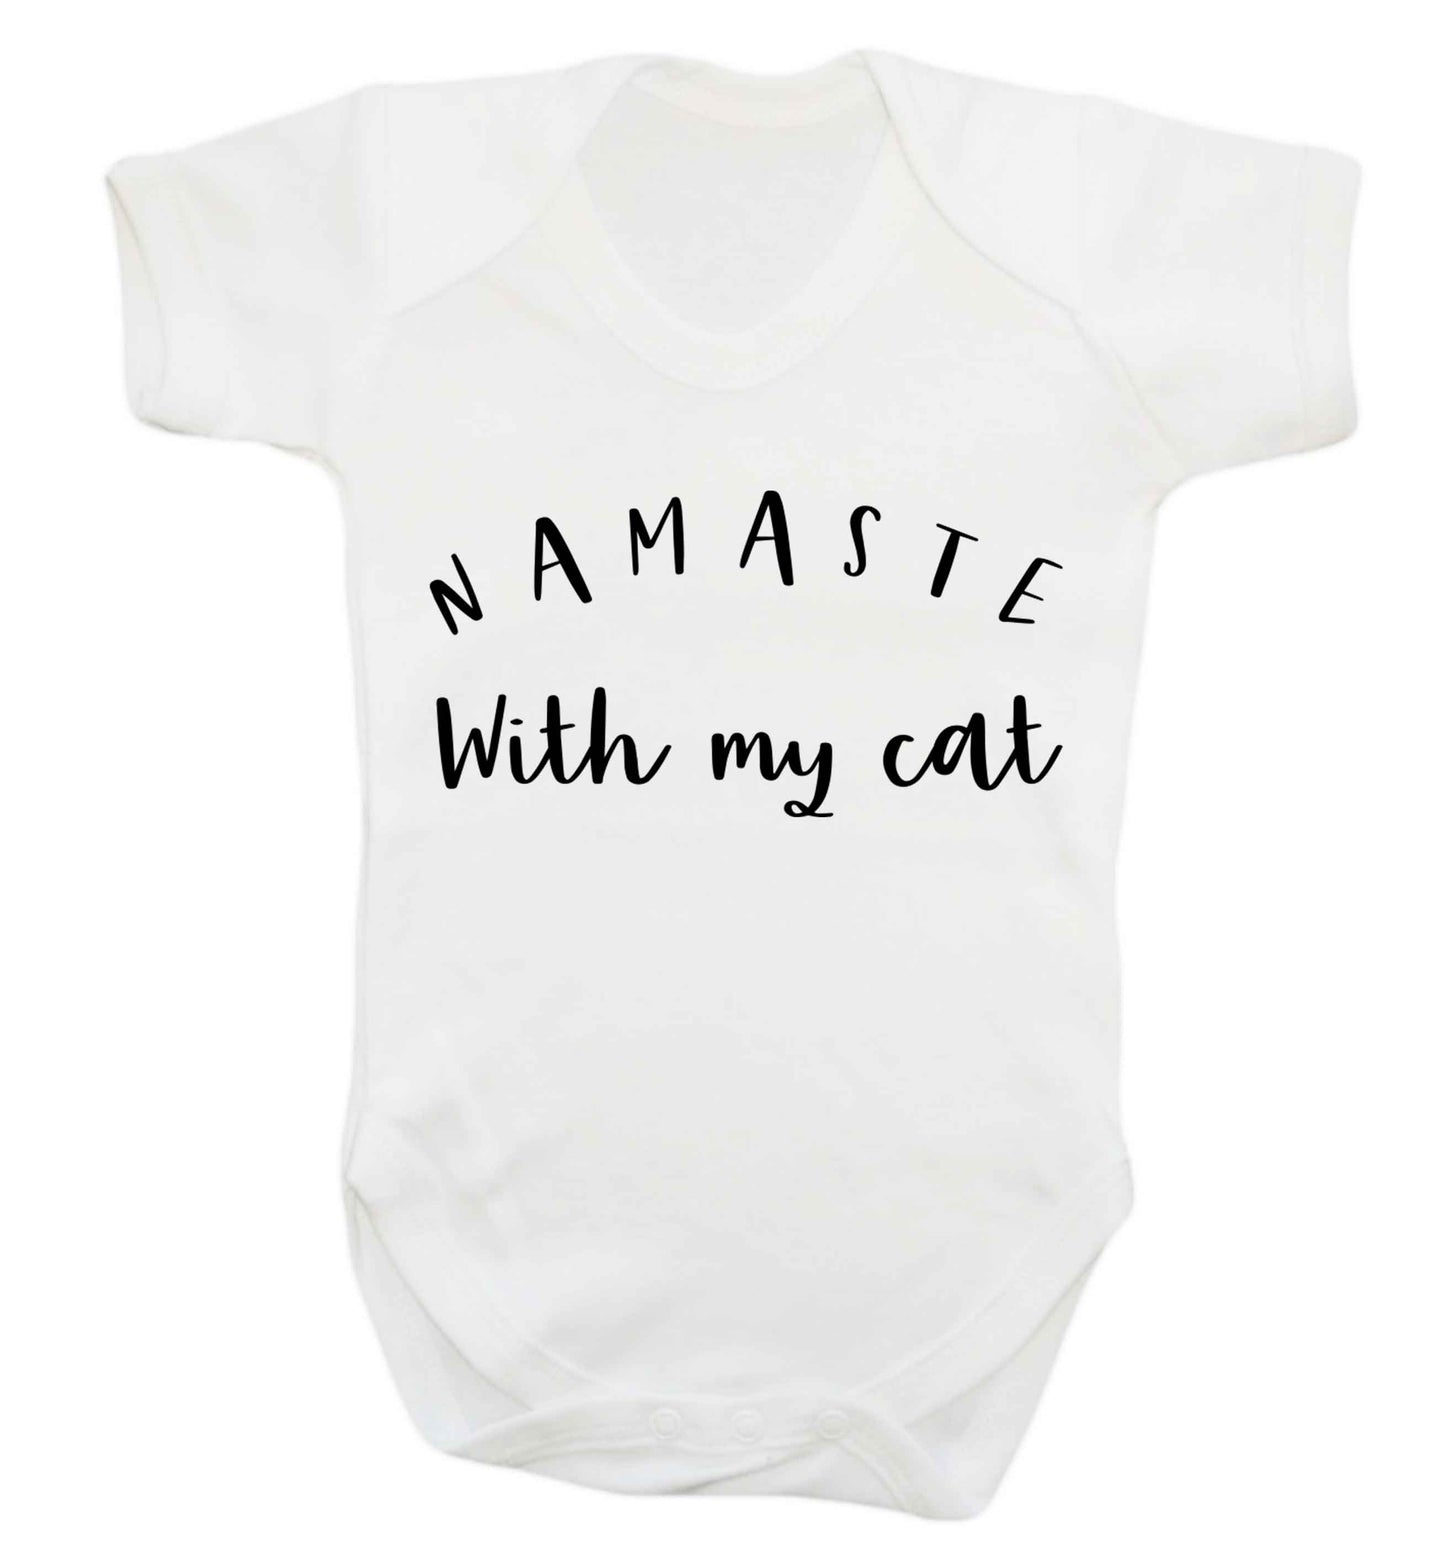 Namaste with my cat Baby Vest white 18-24 months